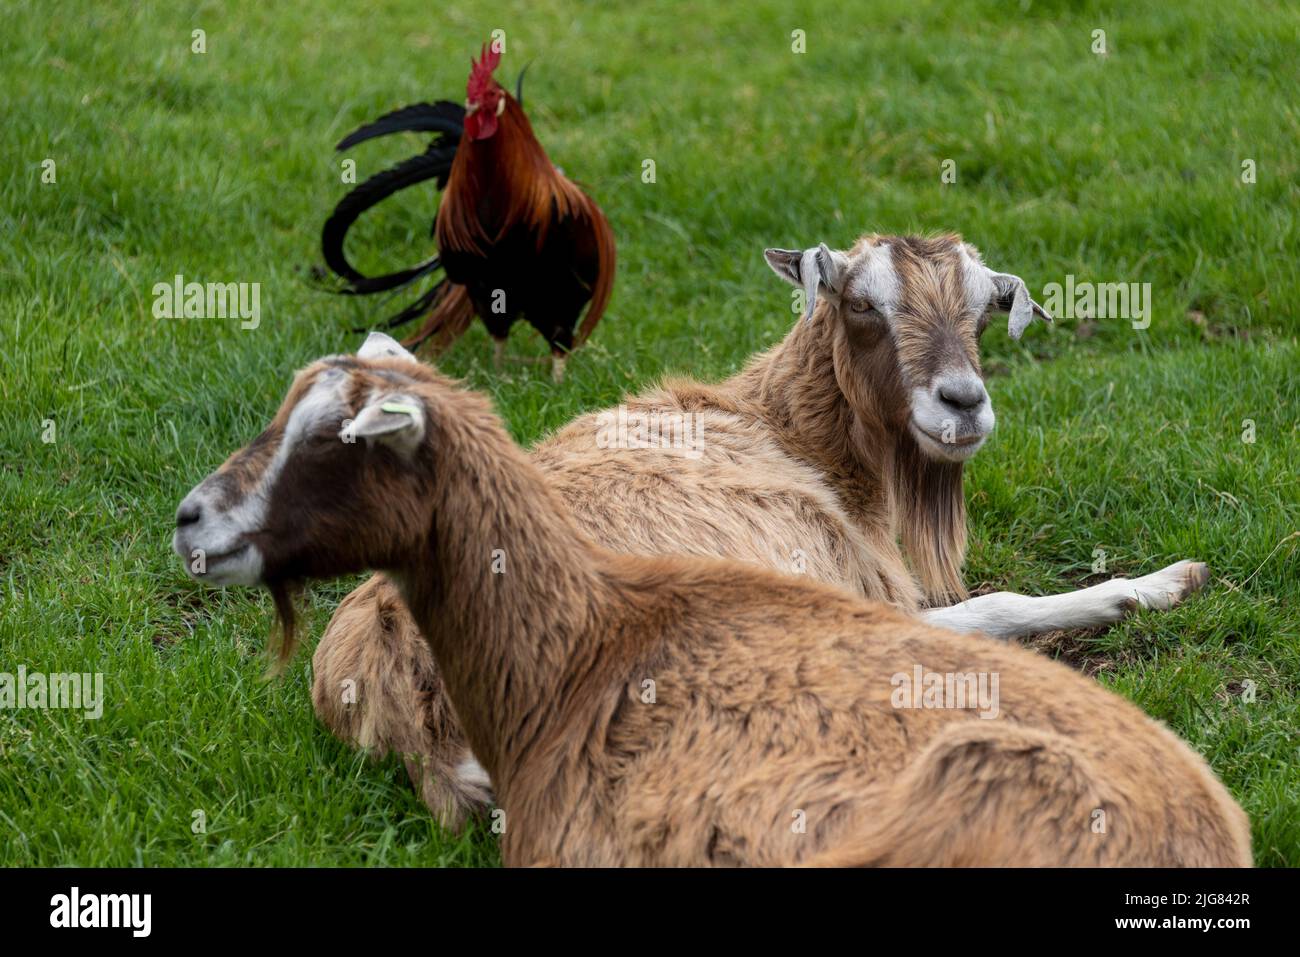 Two goats and a rooster on a meadow Stock Photo